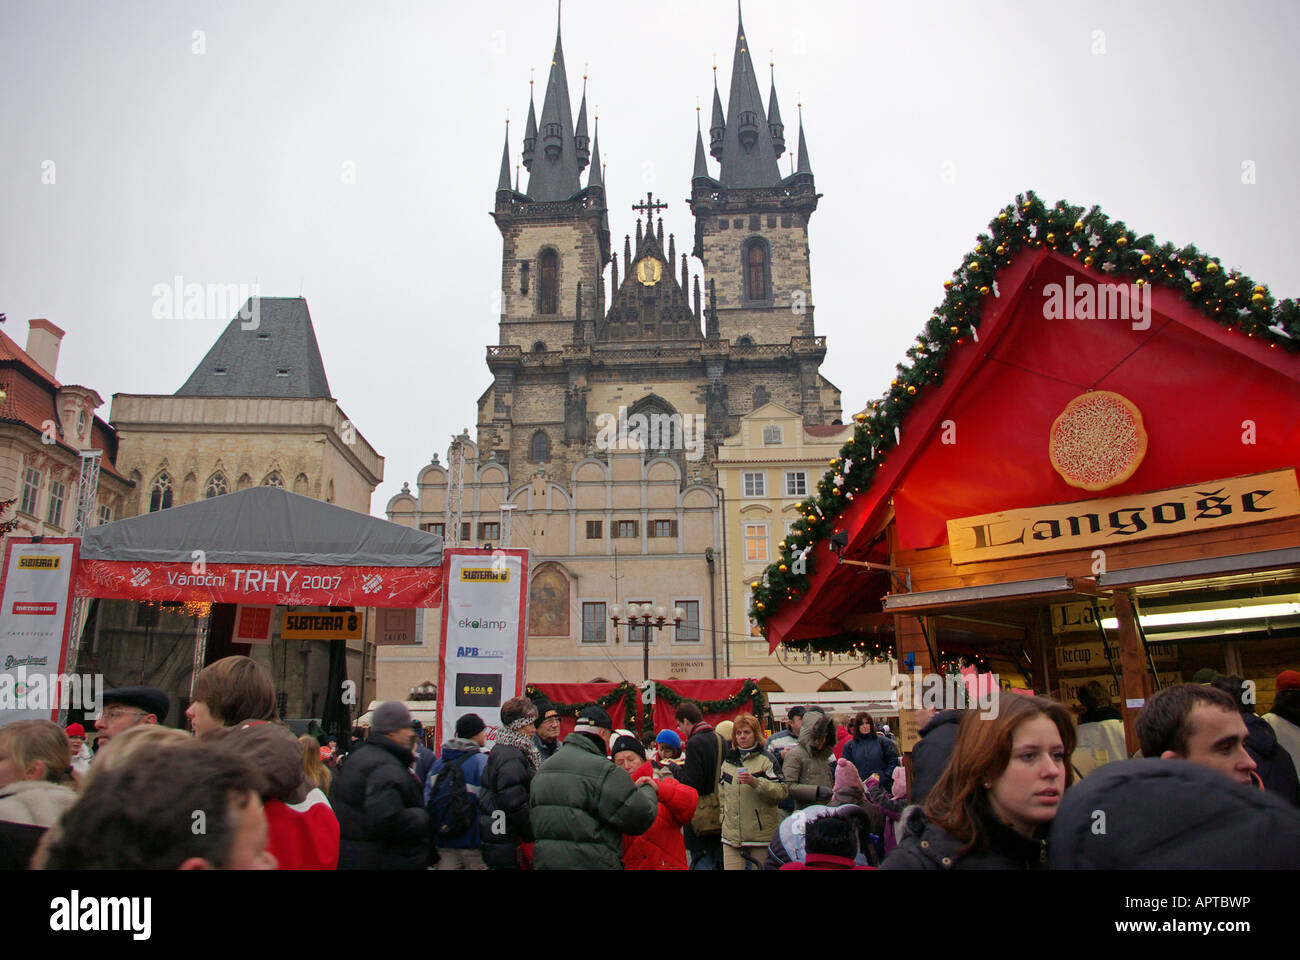 Old Town Square Christmas Market, Gothic twin-steepled Tyn Church in the background. Stock Photo